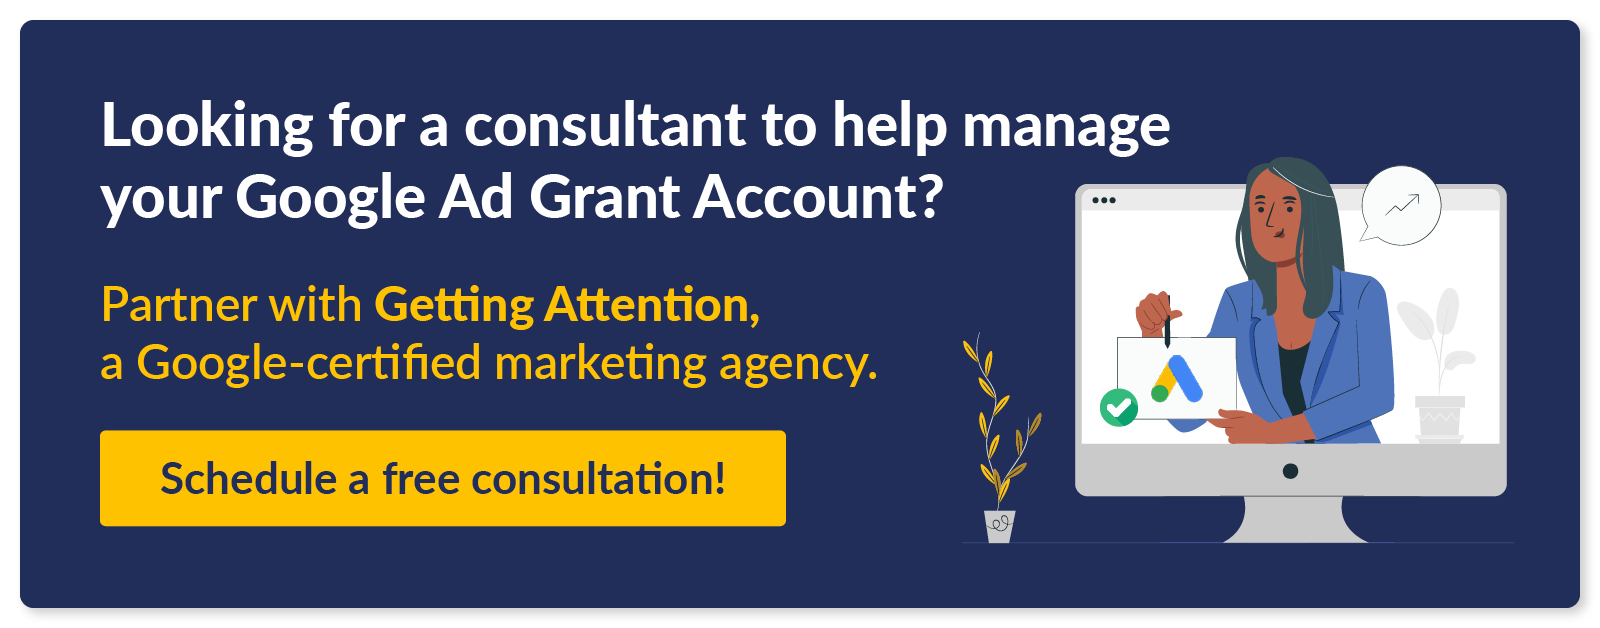 Looking for a consultant to help manage your Google Ad Grant account? Partner with Getting Attention, a Google-certified marketing agency. Schedule a free consultation. 